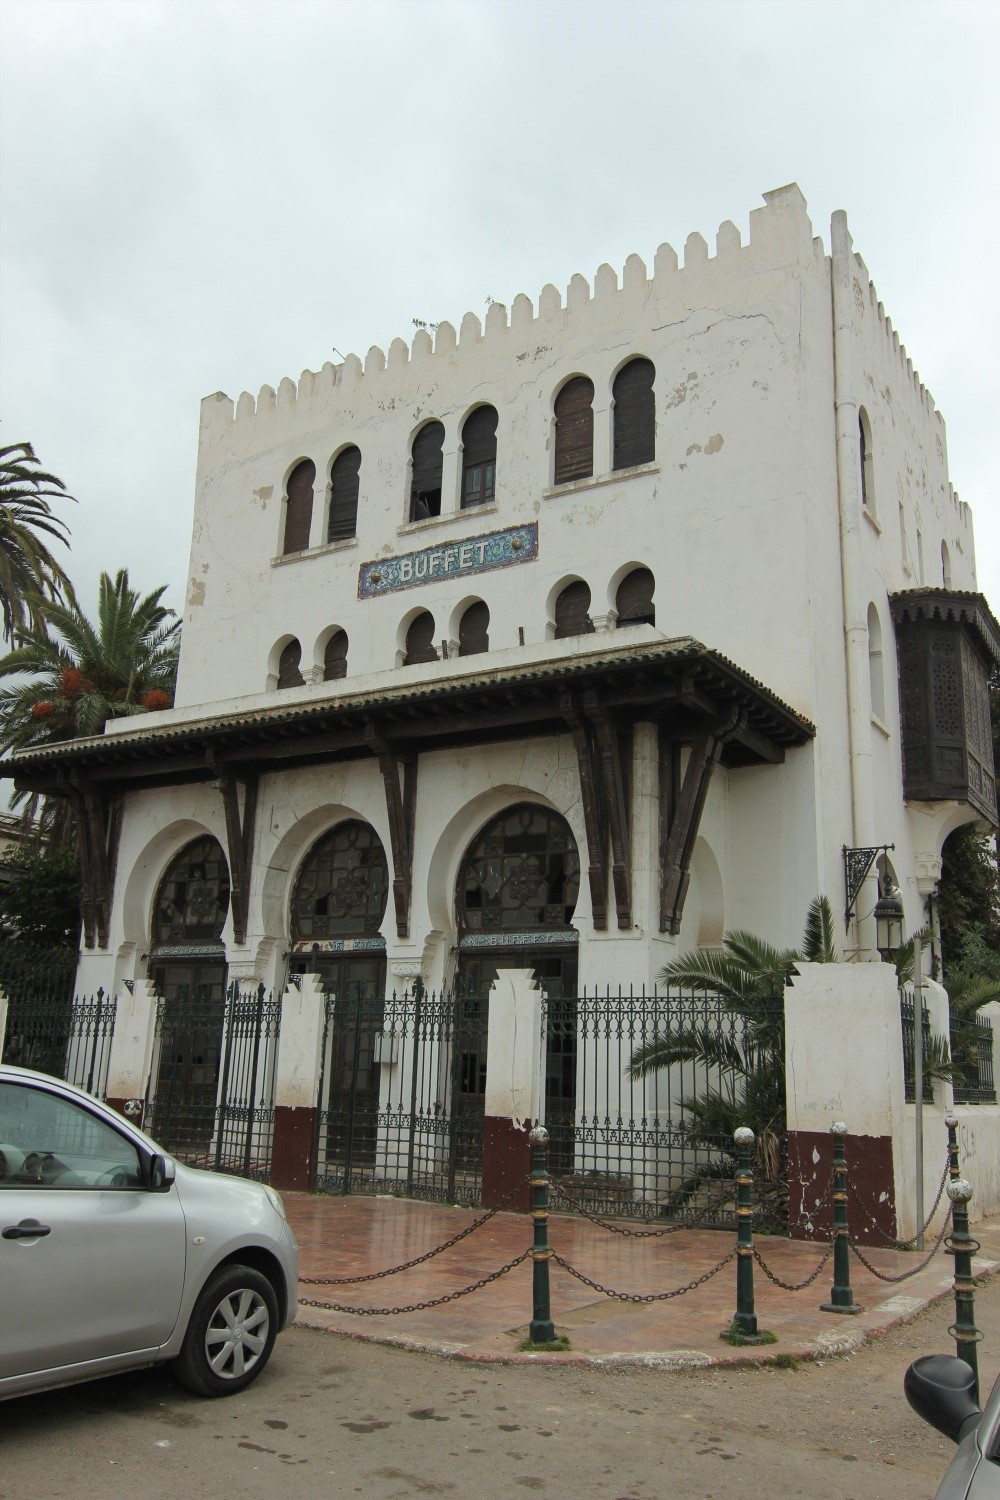 View of the former restaurant pavilion showing Algiers-style doors protected by wooden awnings